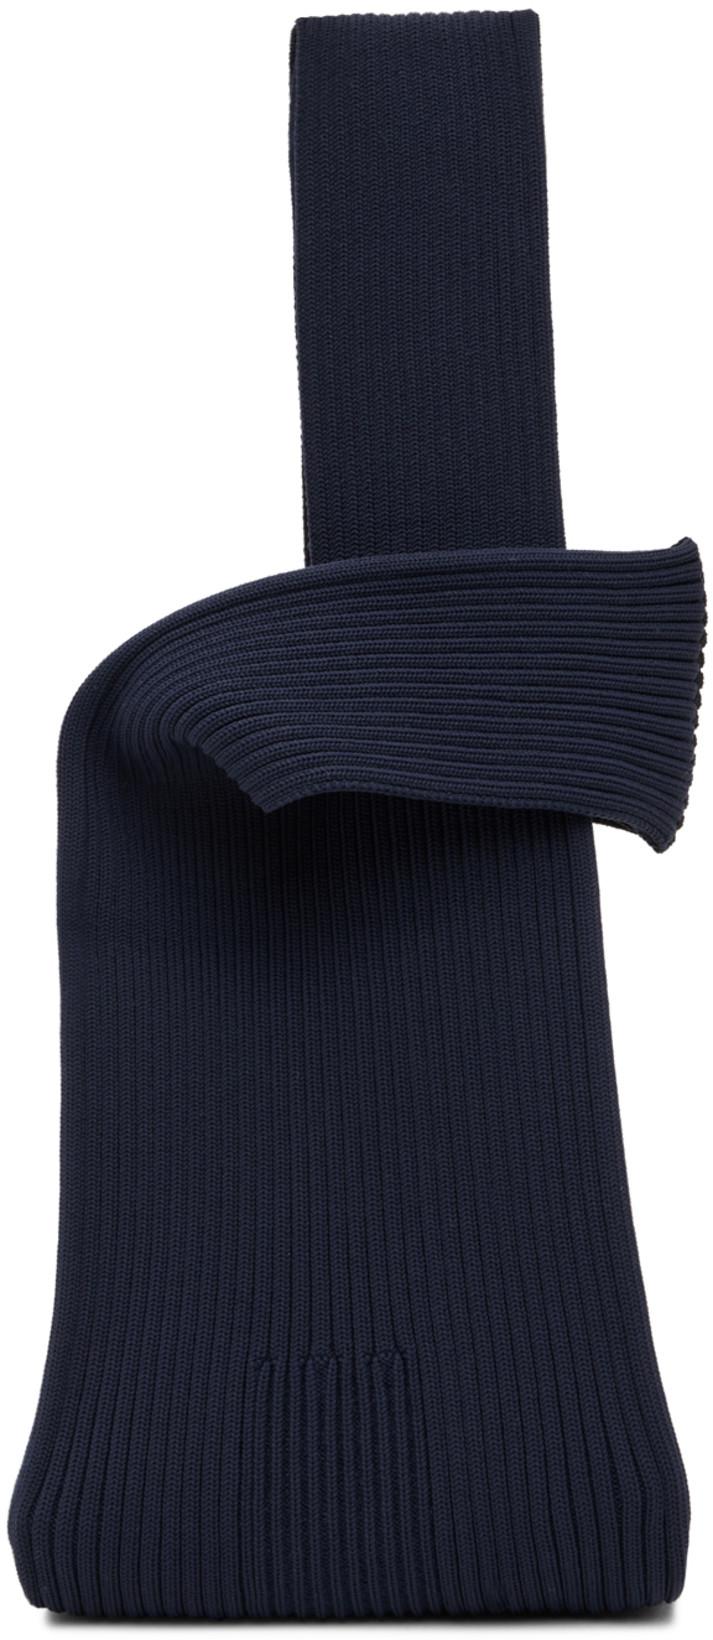 SSENSE Exclusive Navy Notched Rib Tote by CFCL